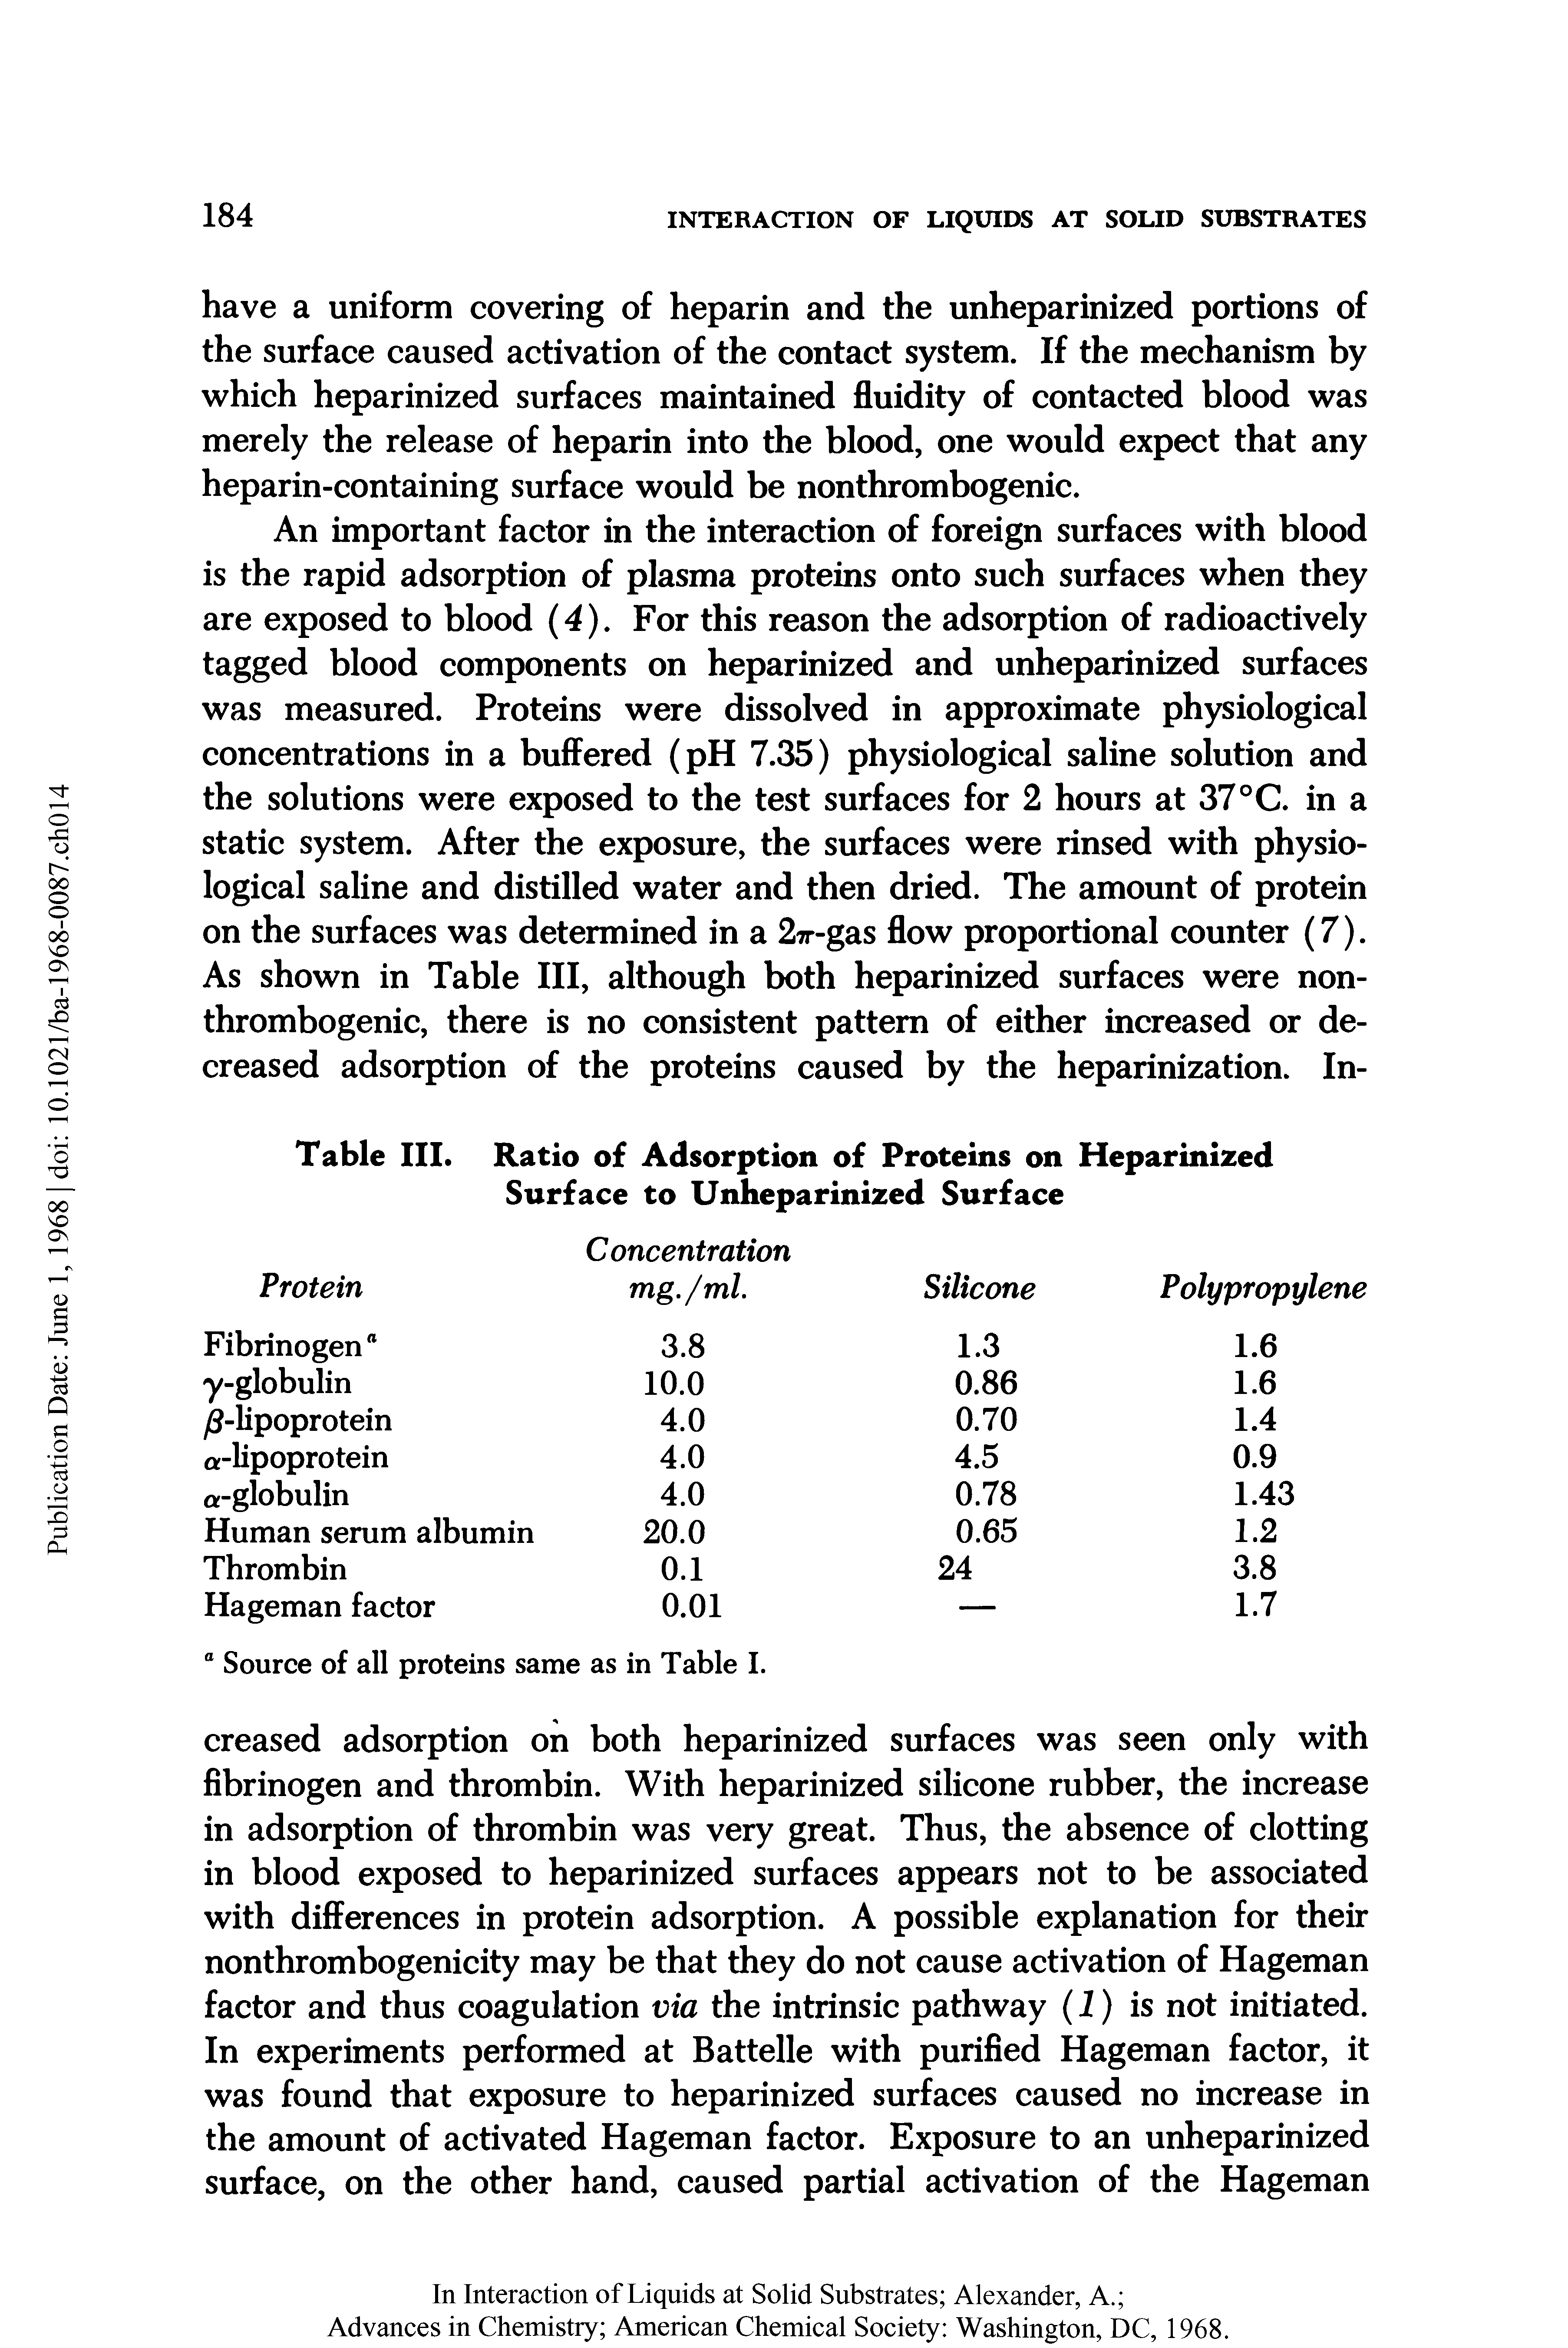 Table III. Ratio of Adsorption of Proteins on Heparinized Surface to Unheparinized Surface...